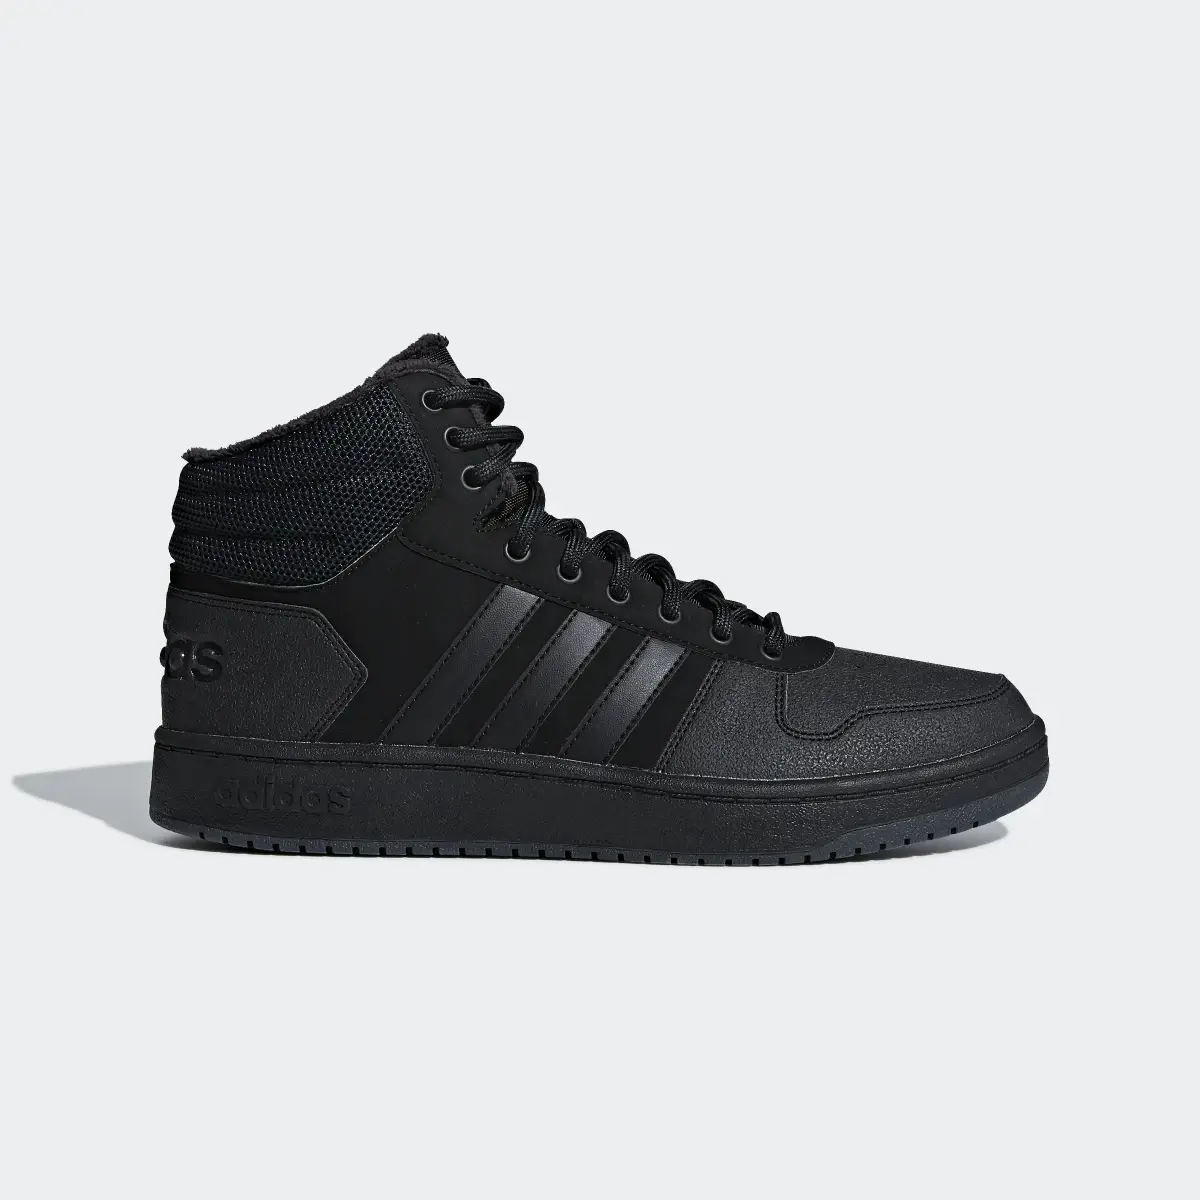 Adidas Hoops 2.0 Mid Shoes. 2